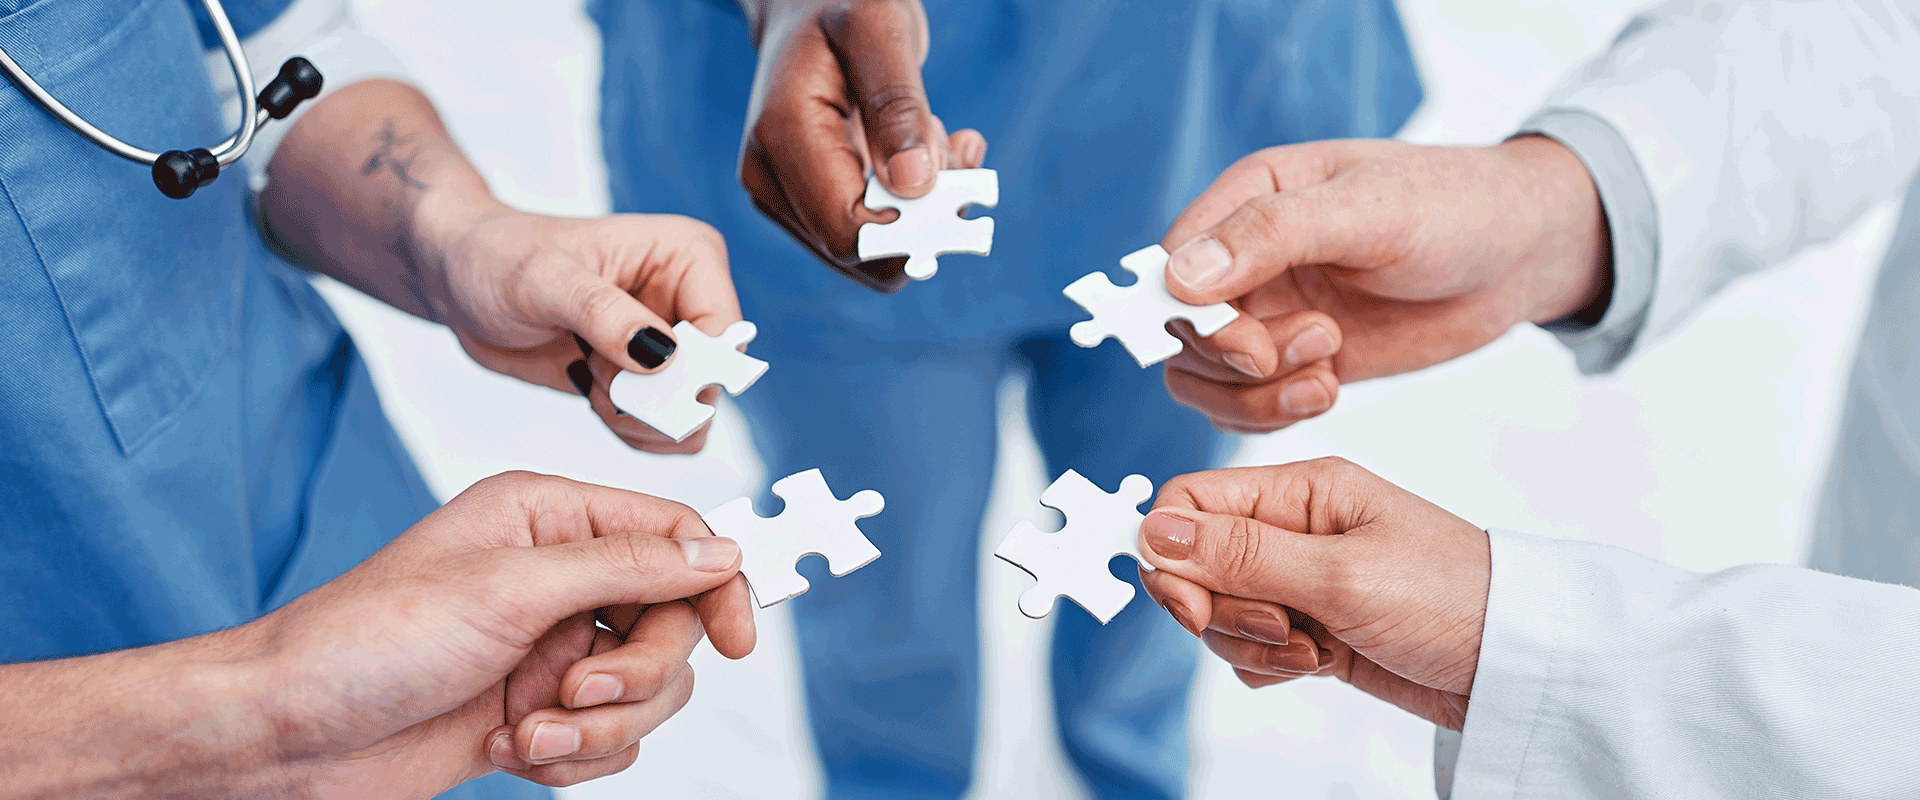 healthcare workers puzzle pieces